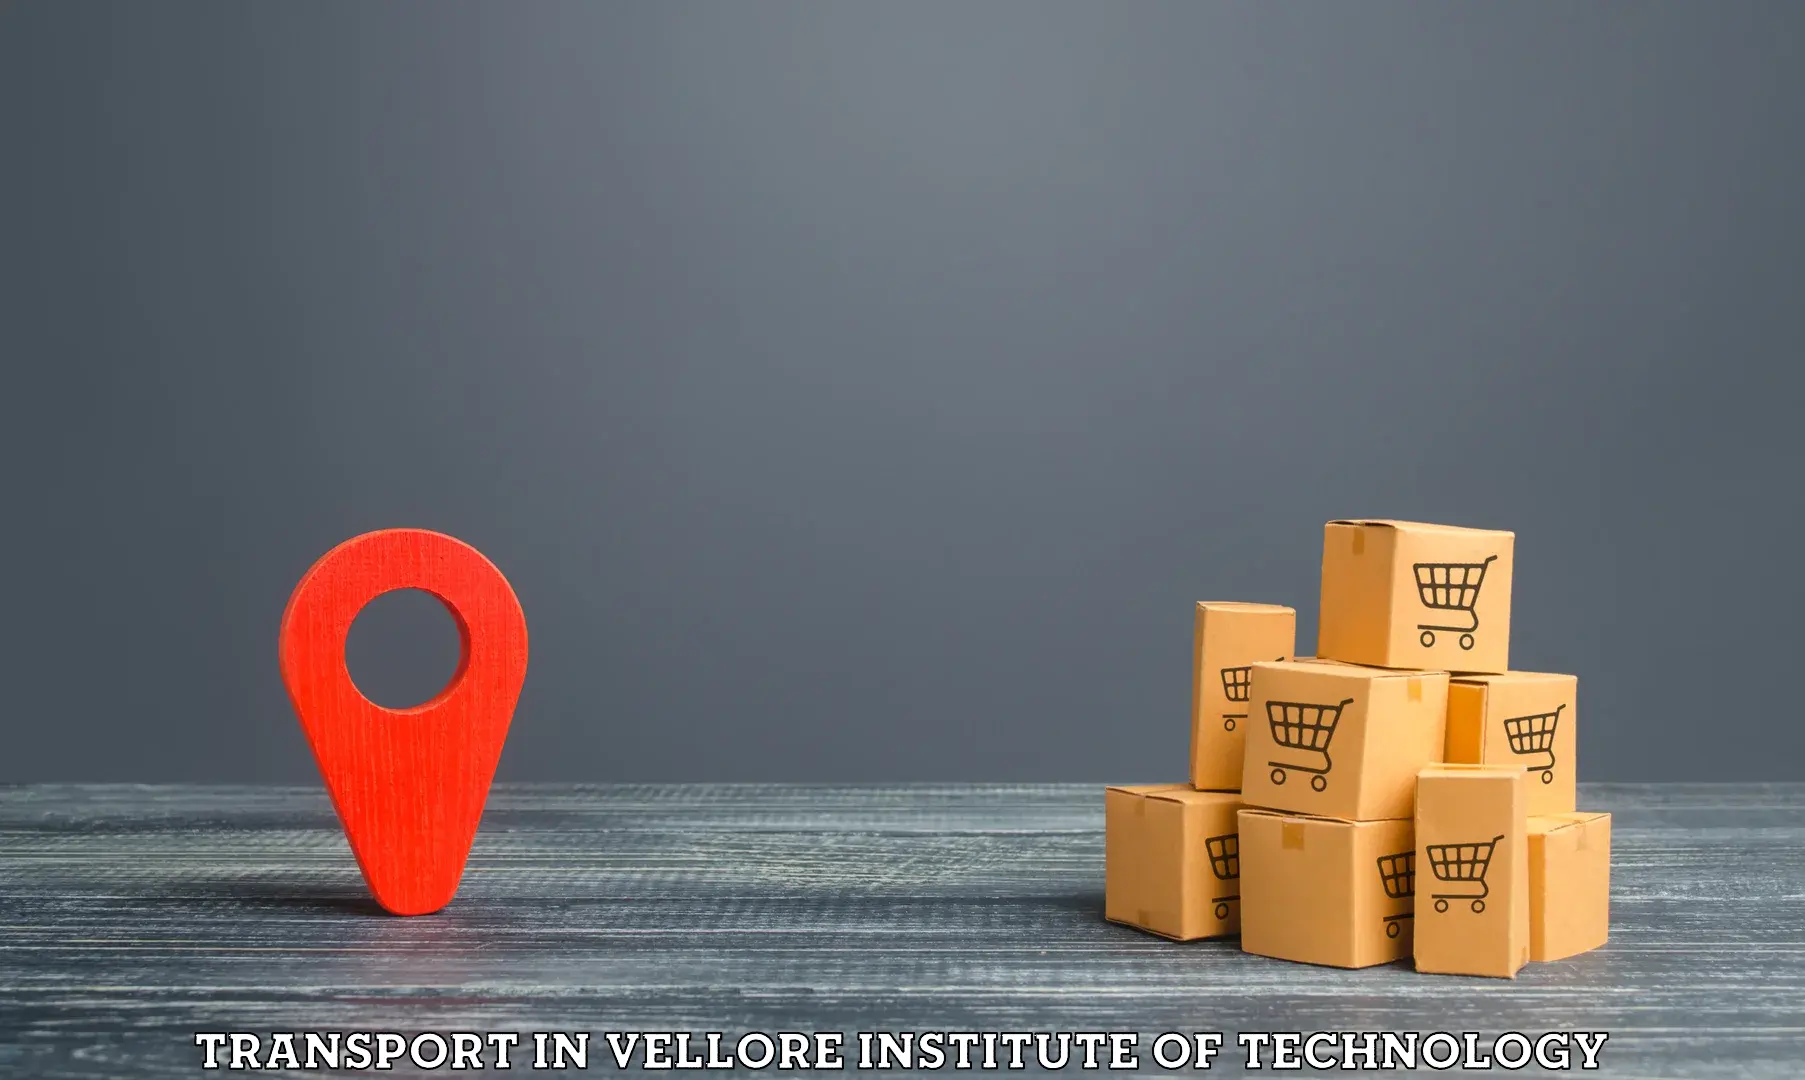 Intercity transport in Vellore Institute of Technology